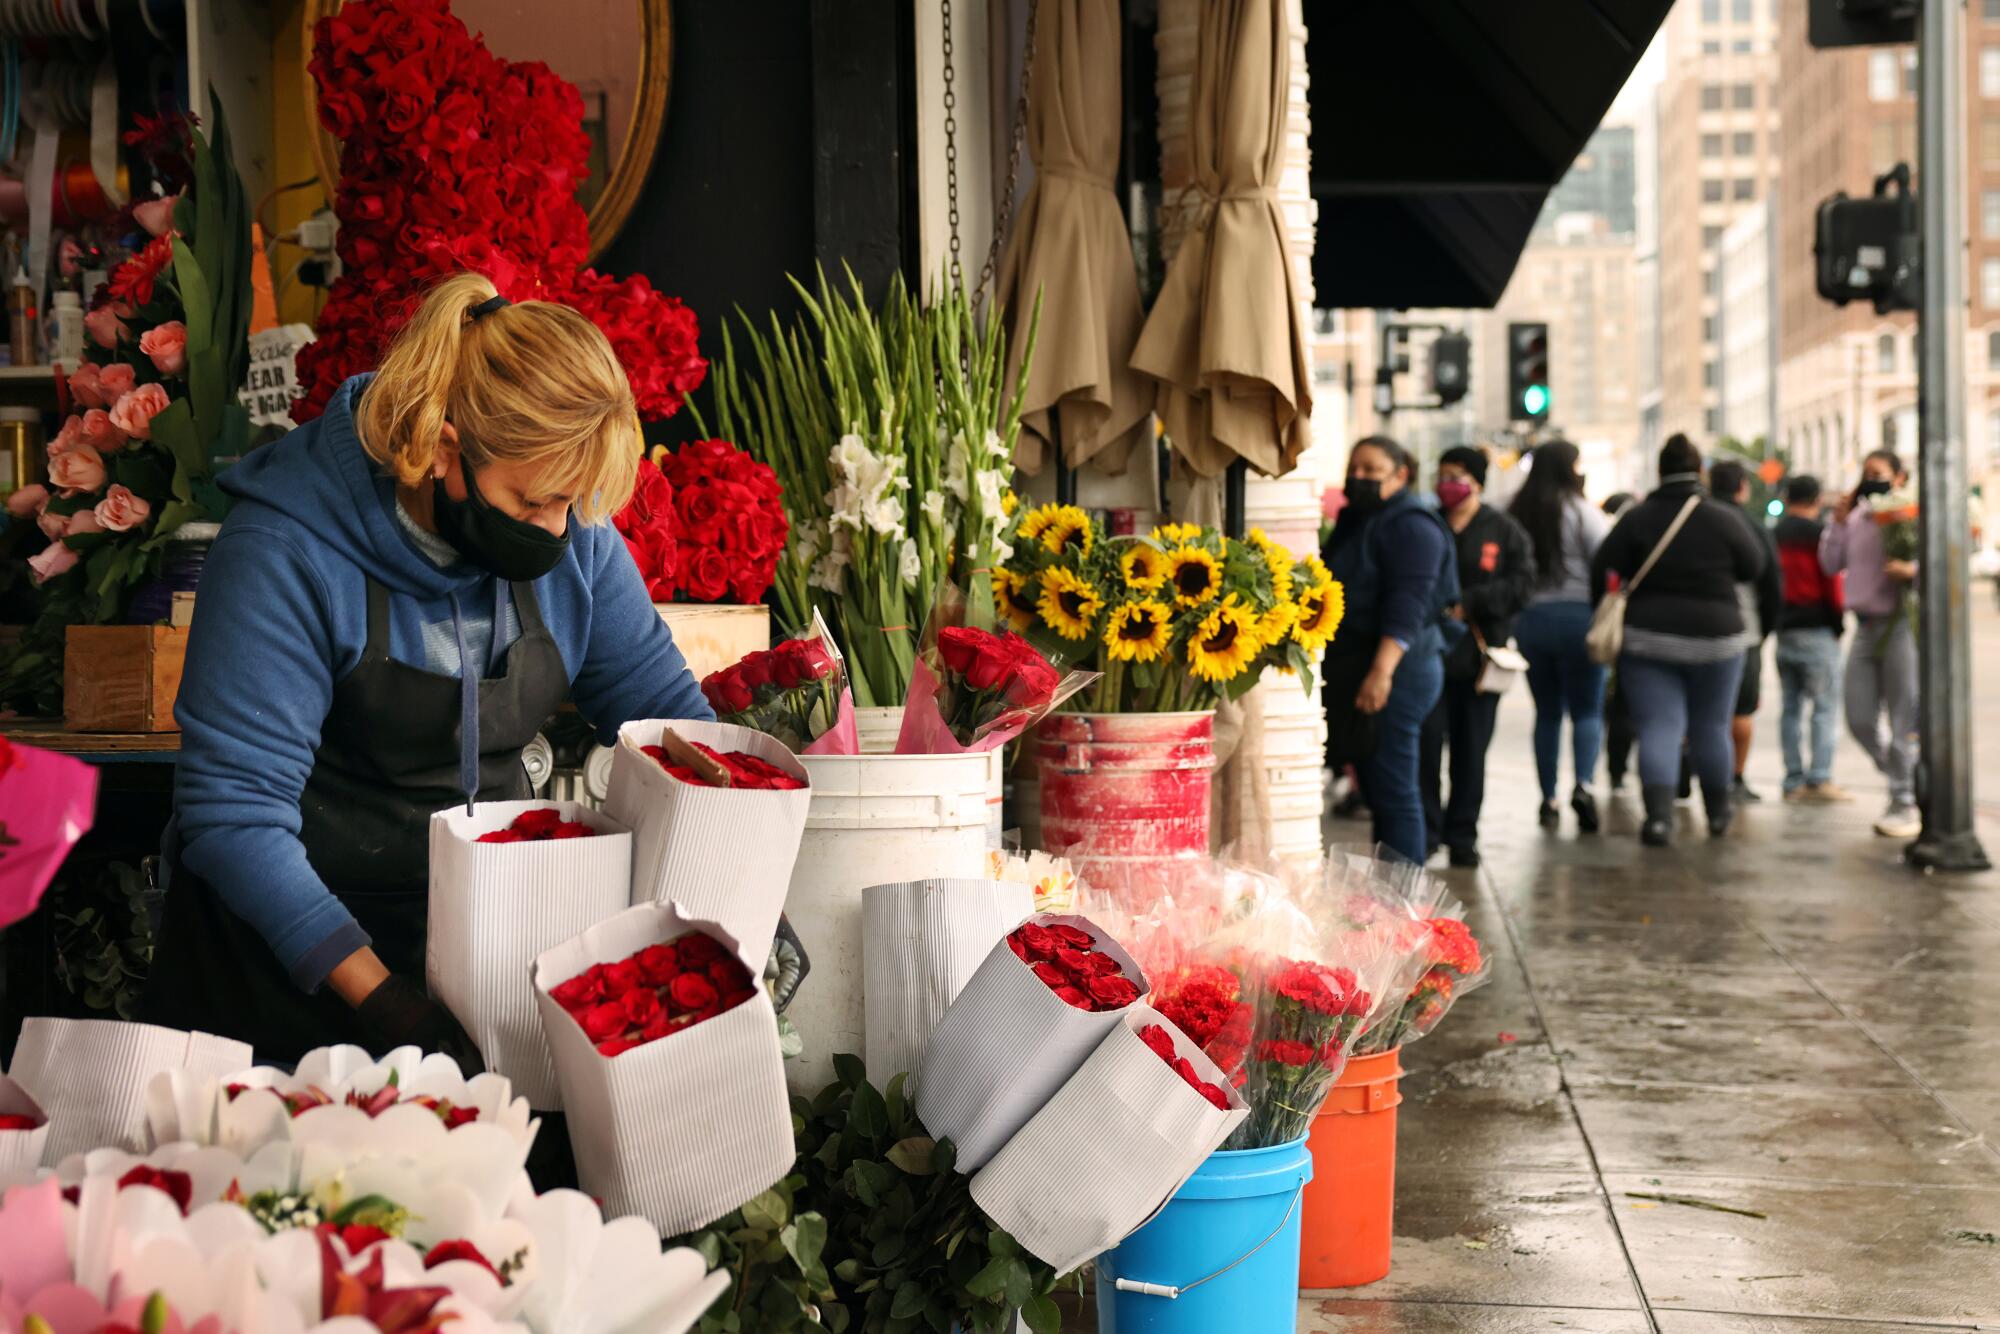 Adriana Gamez restocks the rose bouquets for sale at California Flowers in downtown L.A. on Friday.